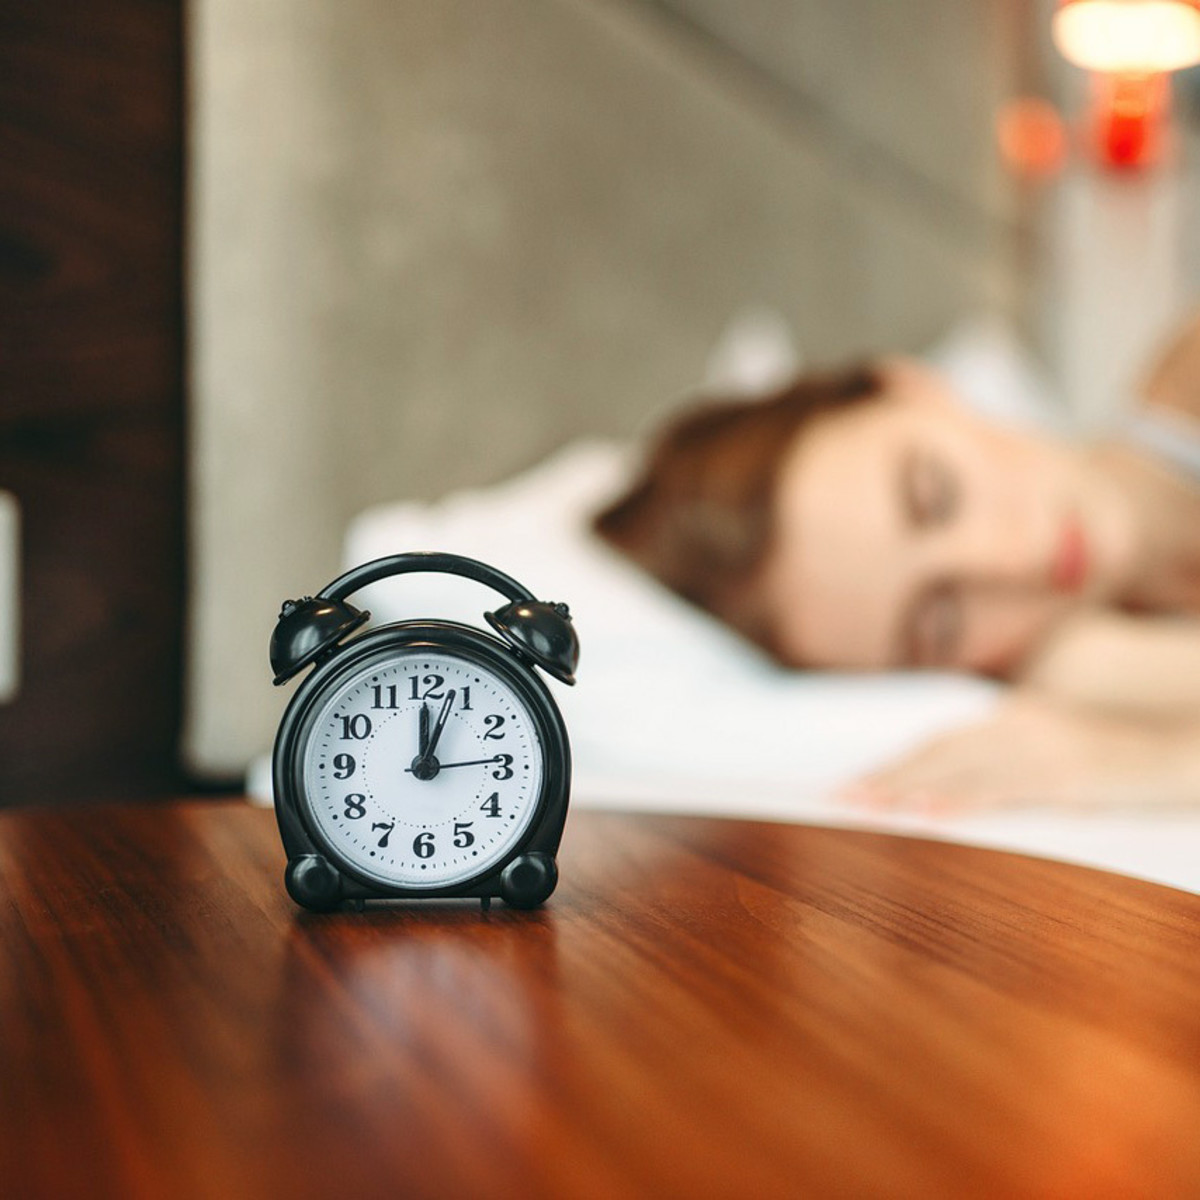 What Your Sleep Preferences Say About You: 4 Human Chronotypes Explained